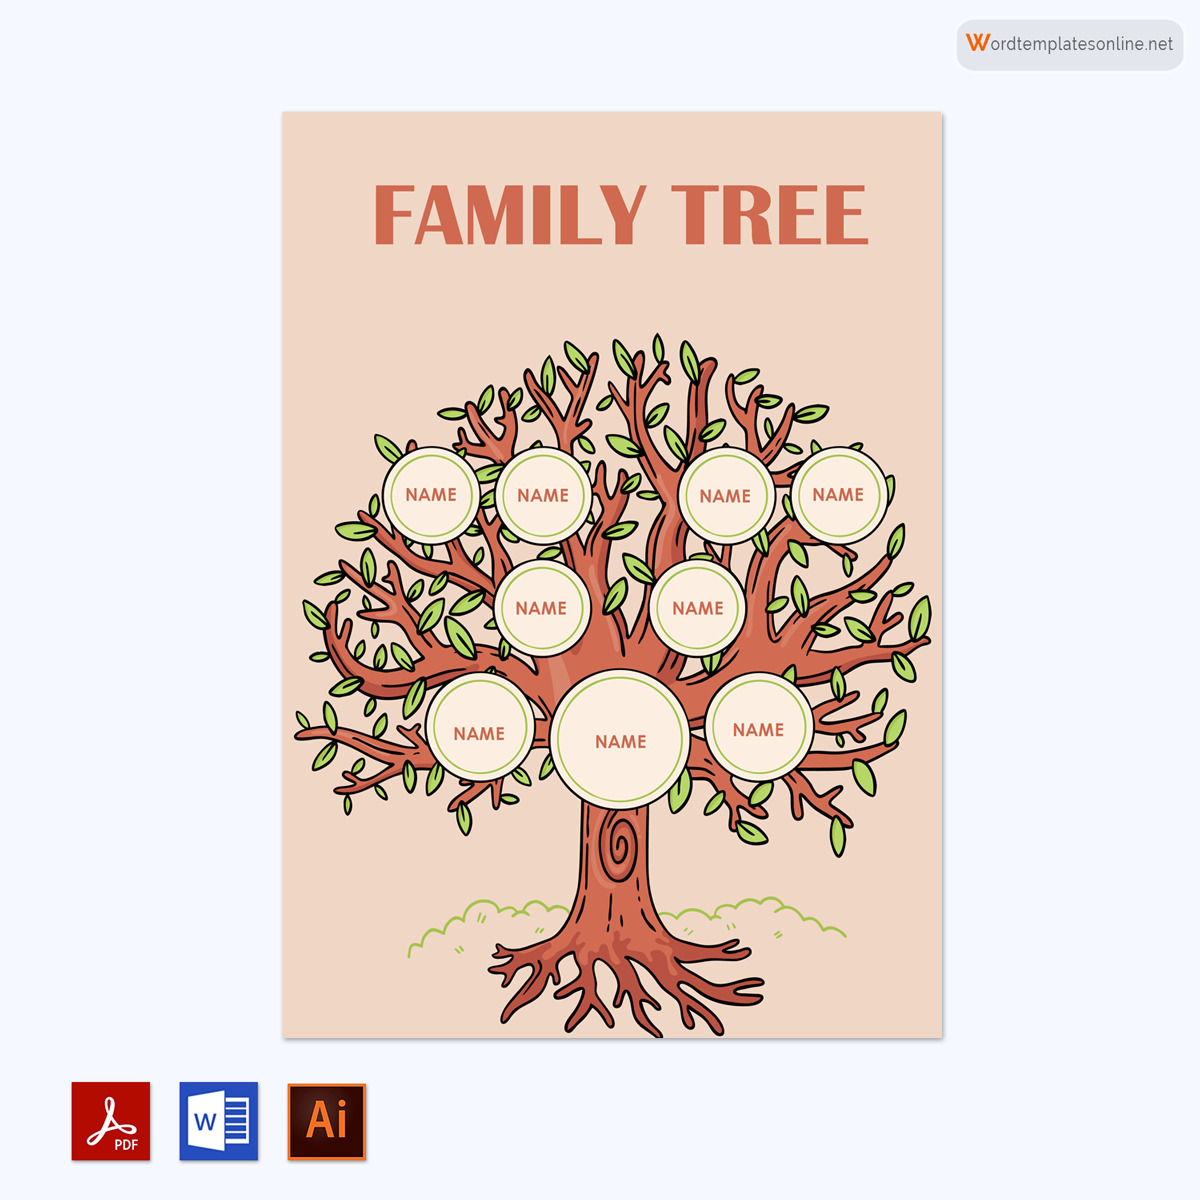  family tree template online 03